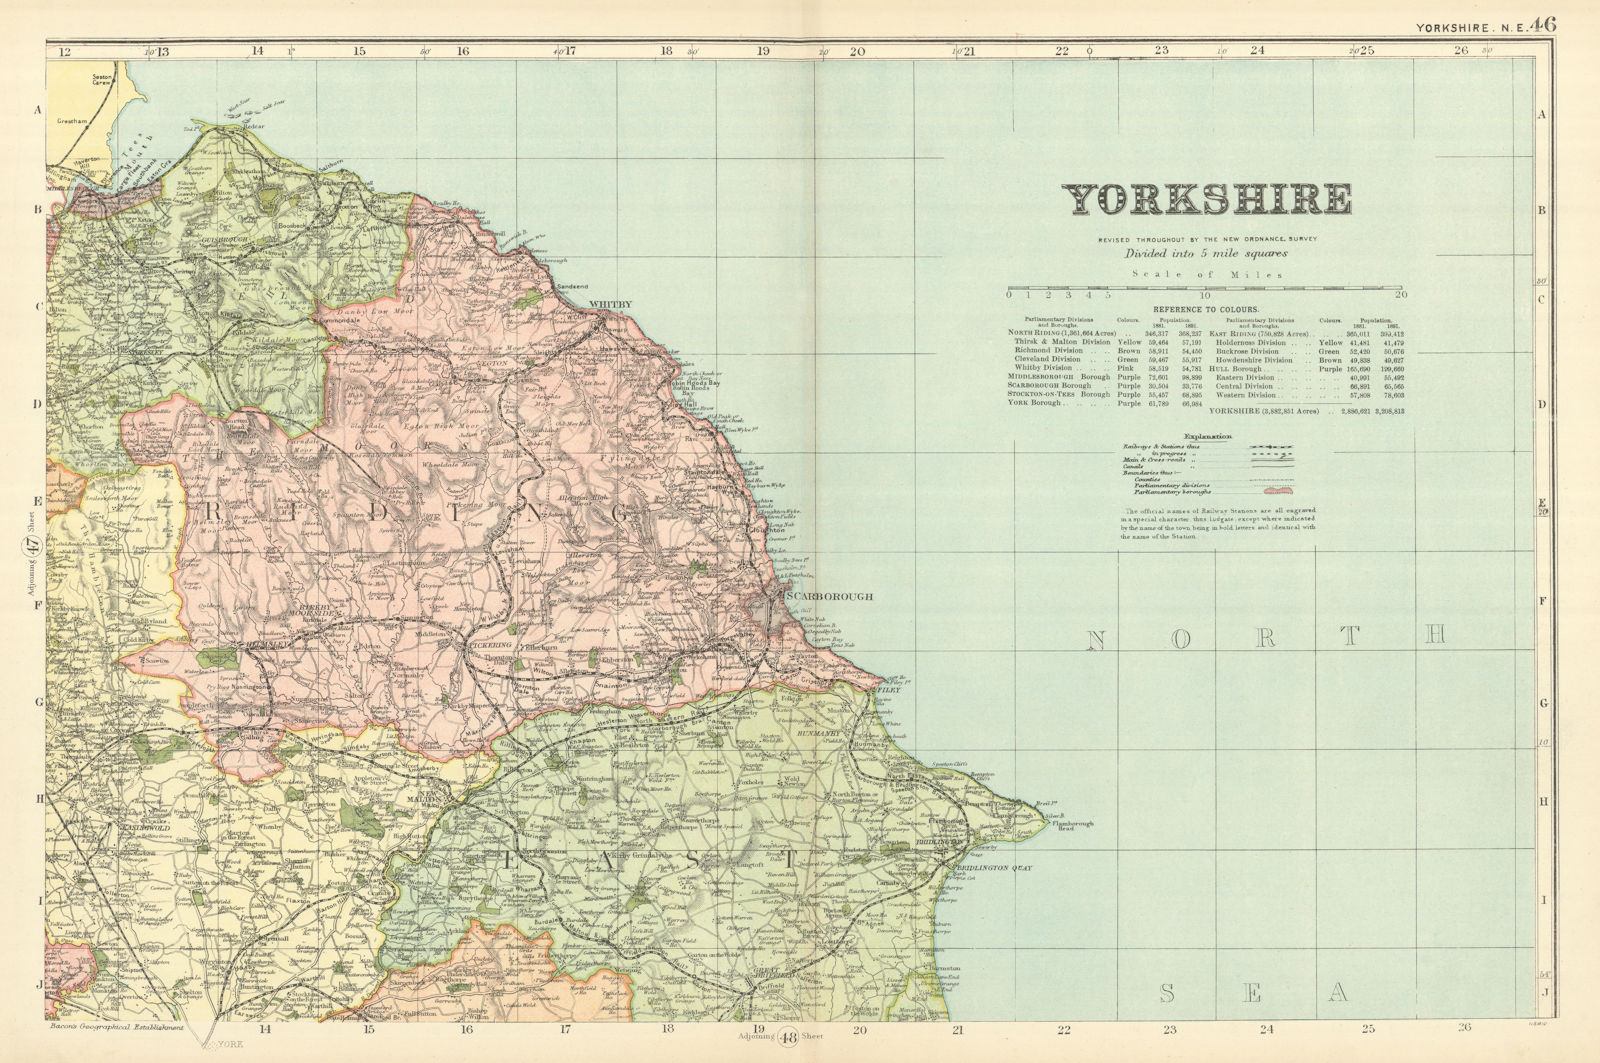 Associate Product YORKSHIRE (North East) Scarborough Whitby antique county map by GW BACON 1898